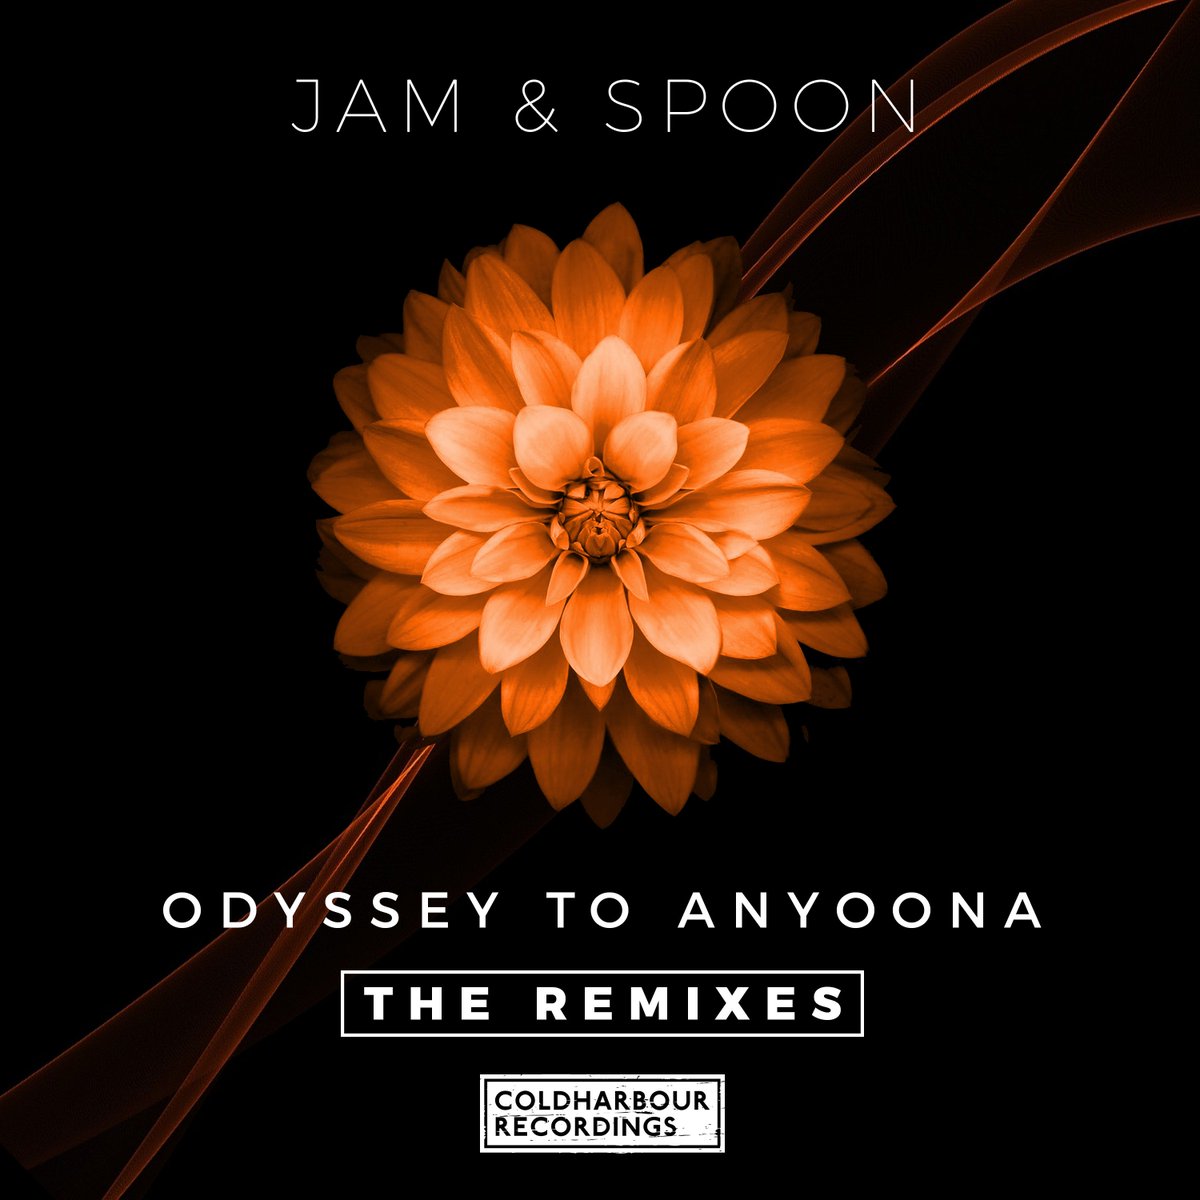 Preview my remix with @JamElMarMusic of Odyssey To Anyoona 🎹 soundcloud.com/markusschulz/j… https://t.co/nEkRf2lmTe